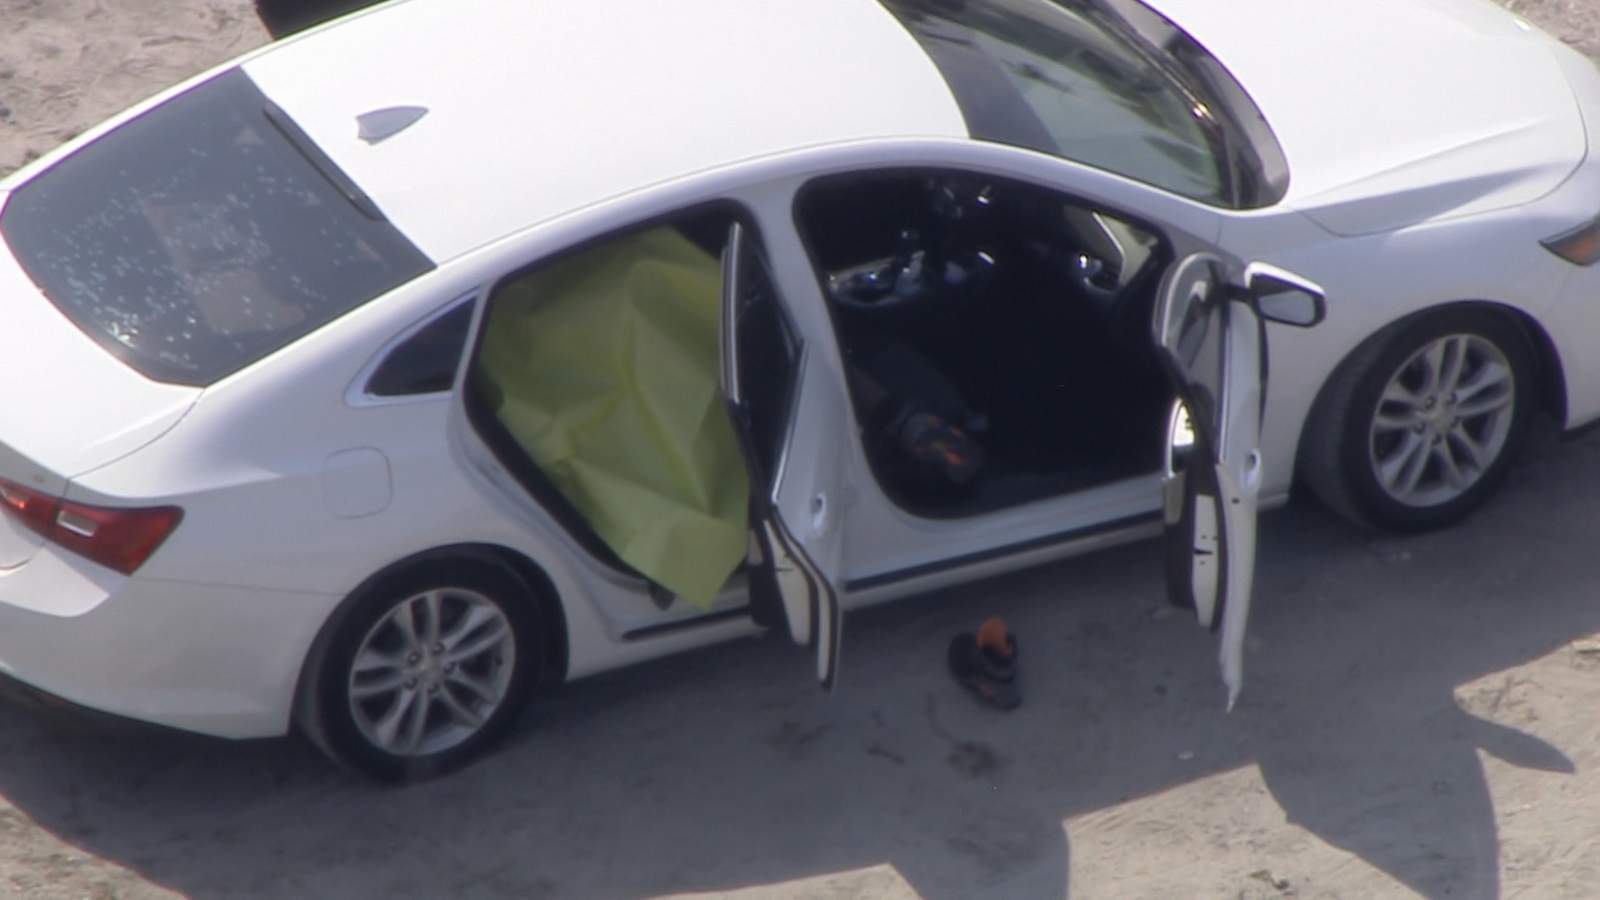 Officers found a person dead inside a car on Friday in Miami Gardens.